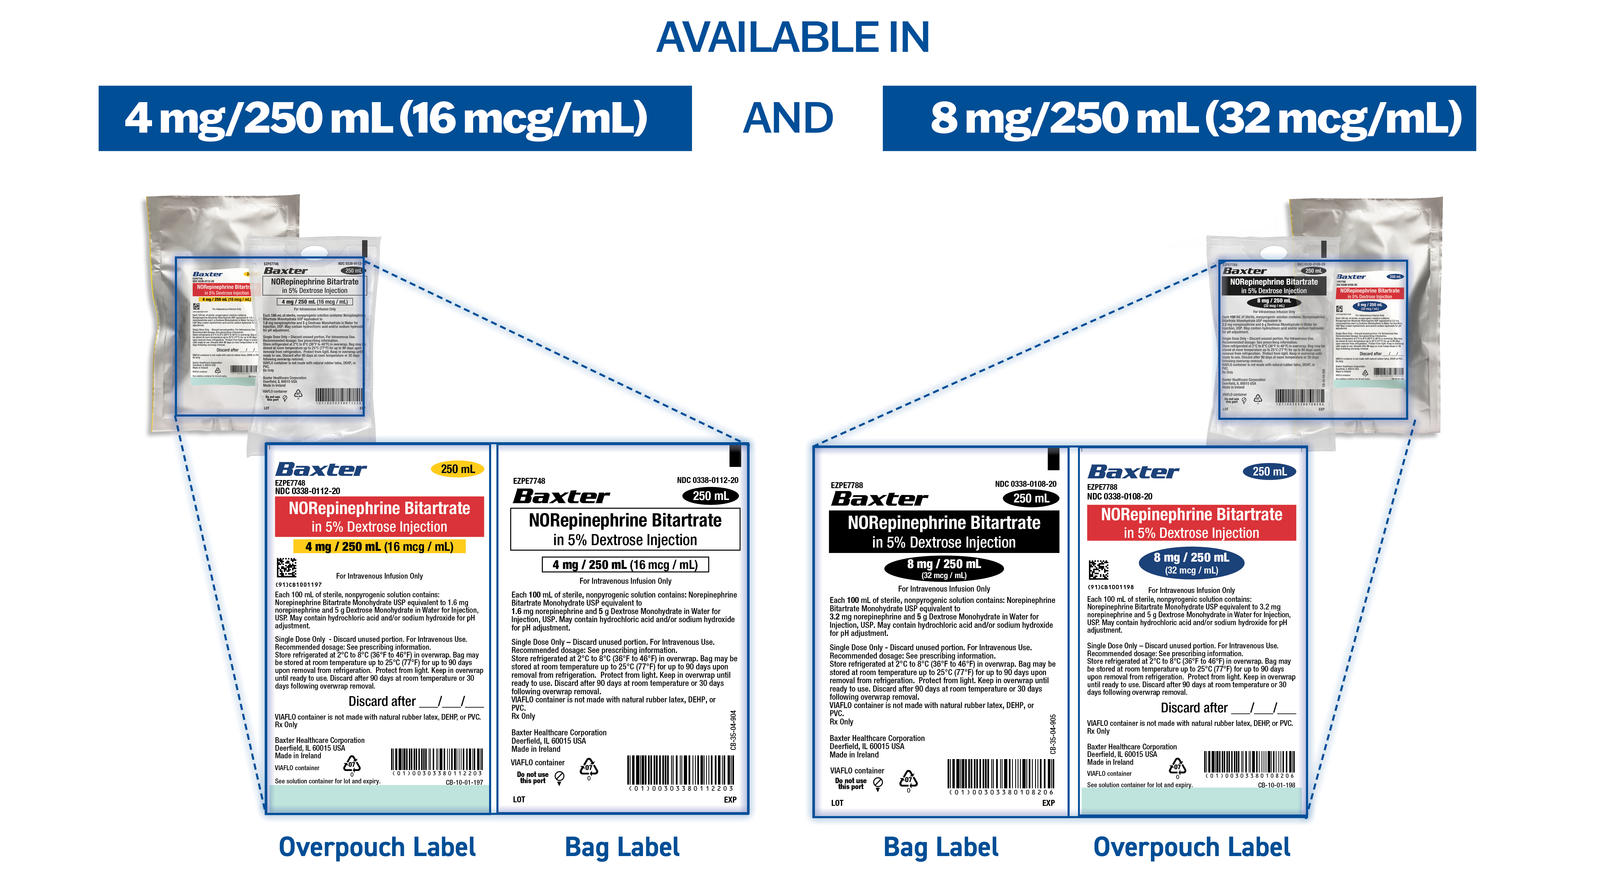 Premix Norepinephrine from Baxter has distinctly labeled packages with light-shielding overpouch